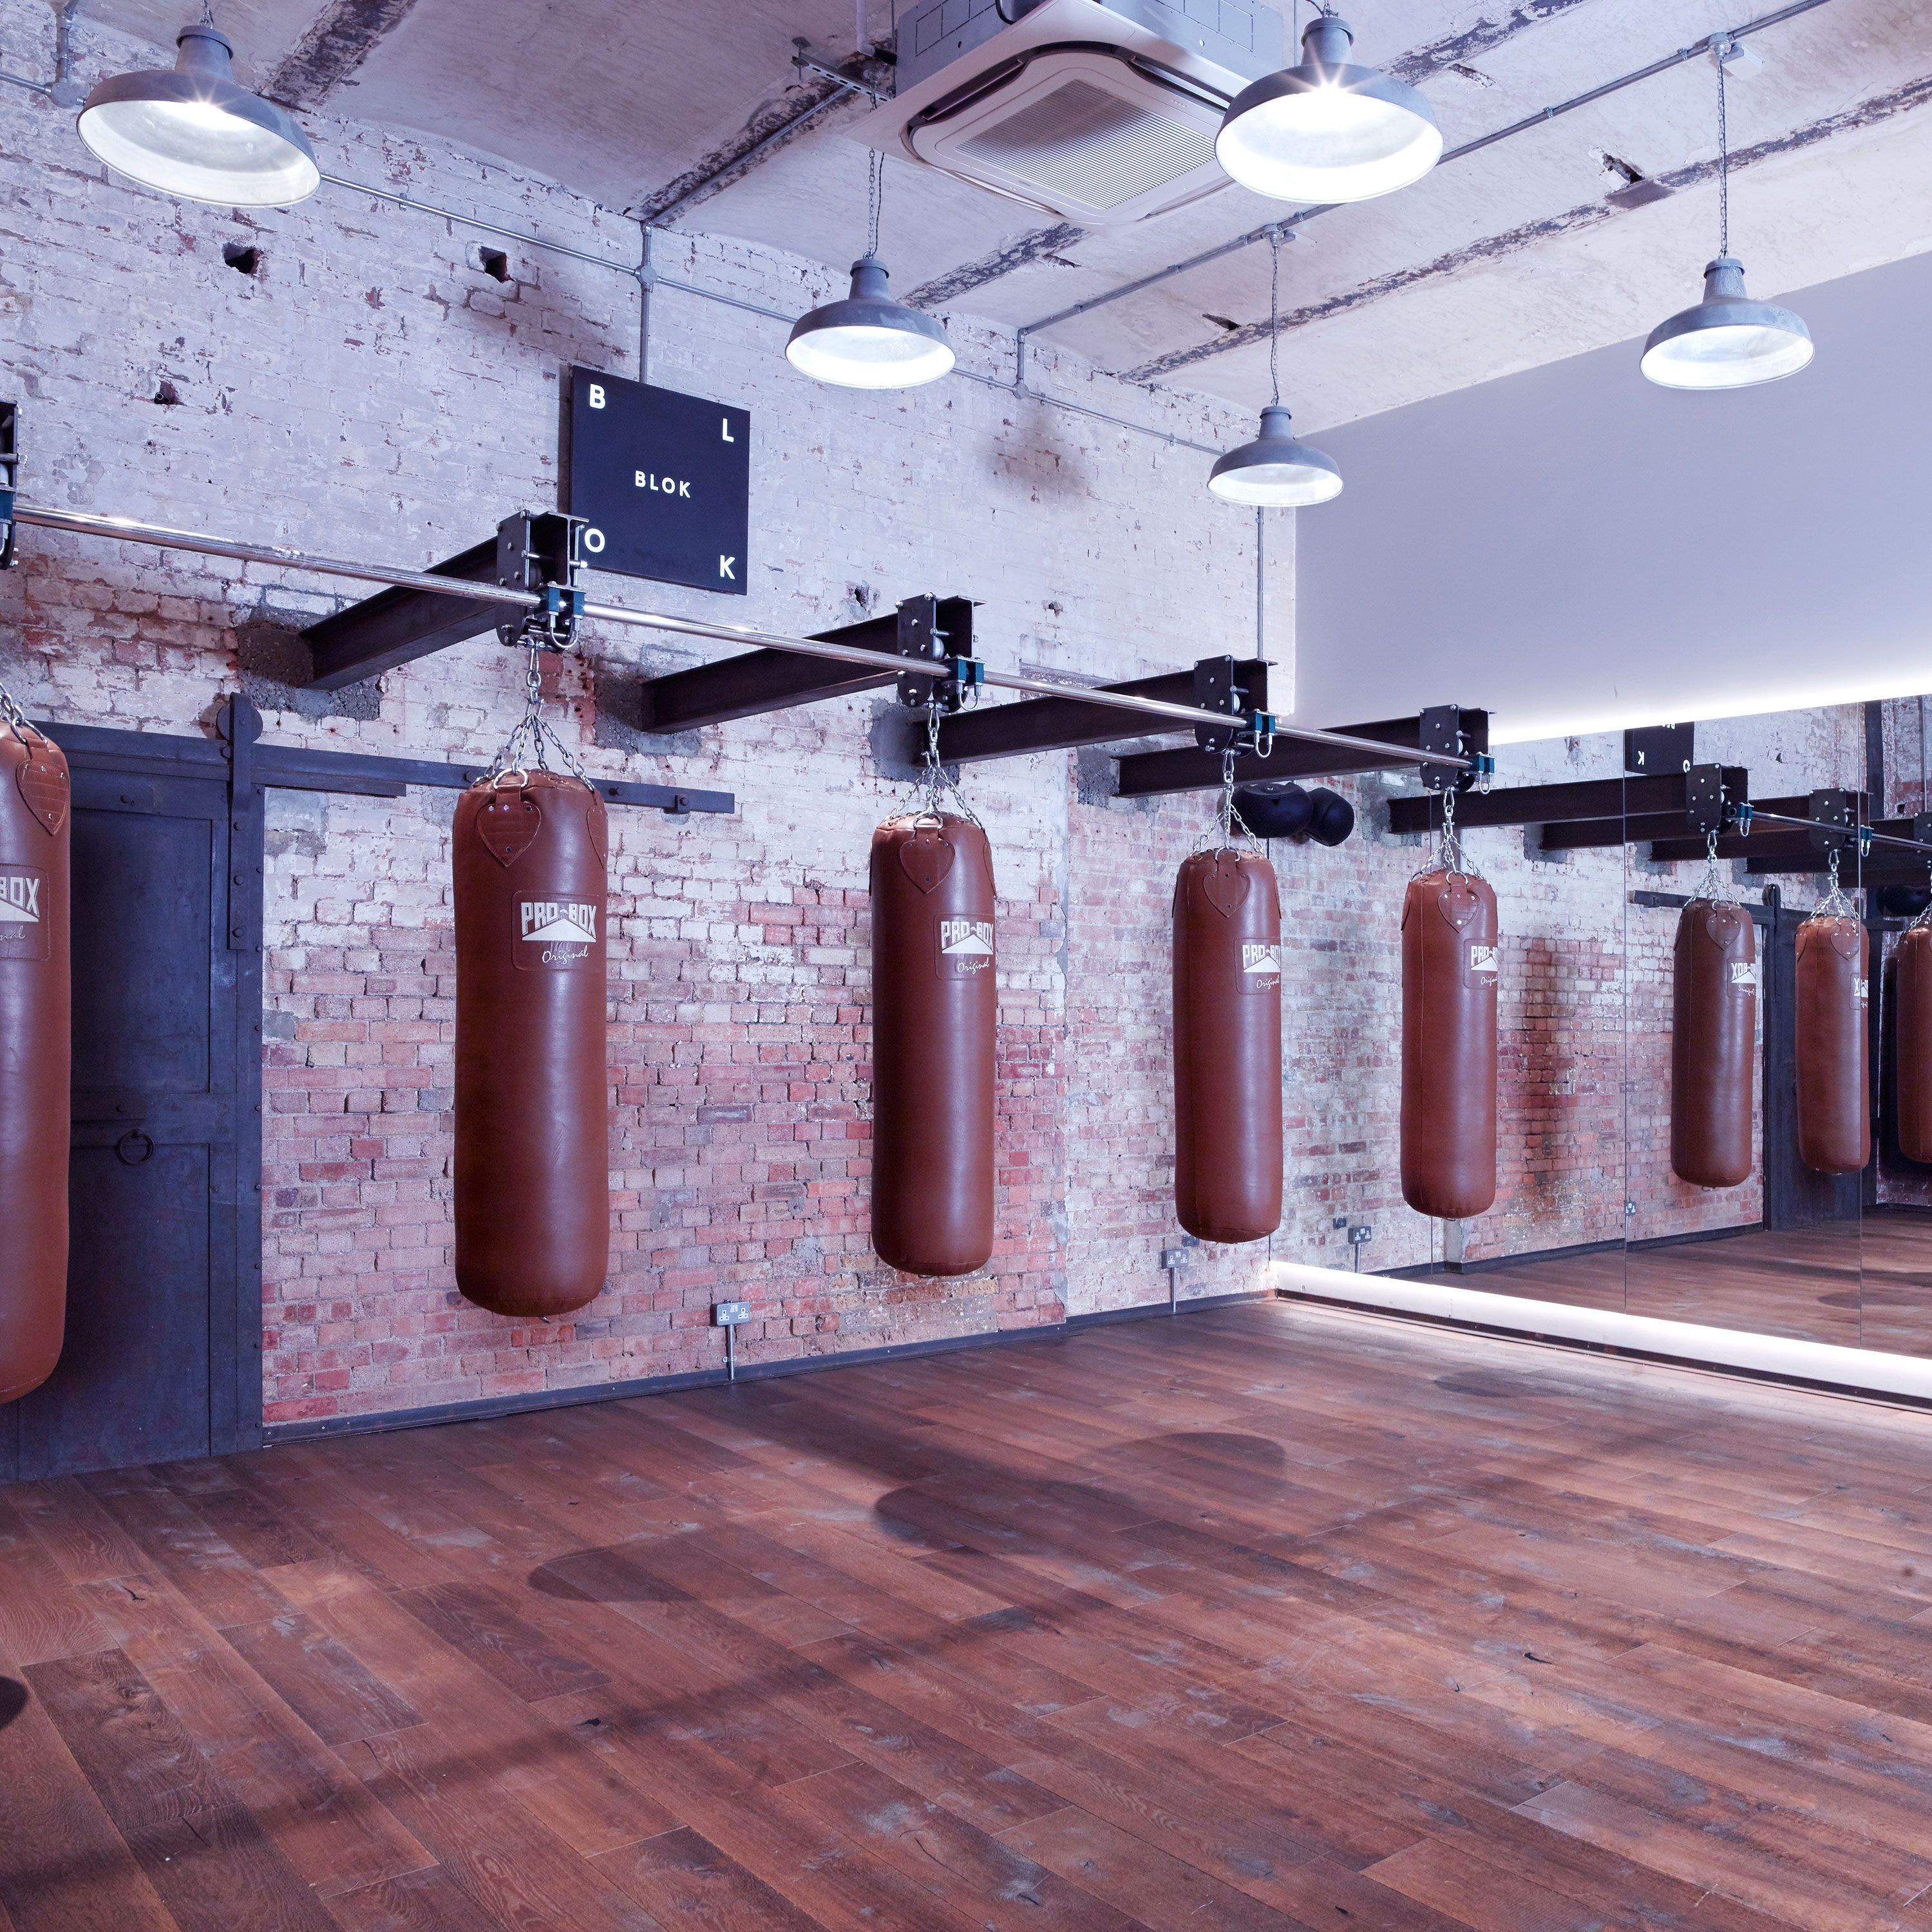 9 of the best boutique gyms -   25 fitness design spaces
 ideas